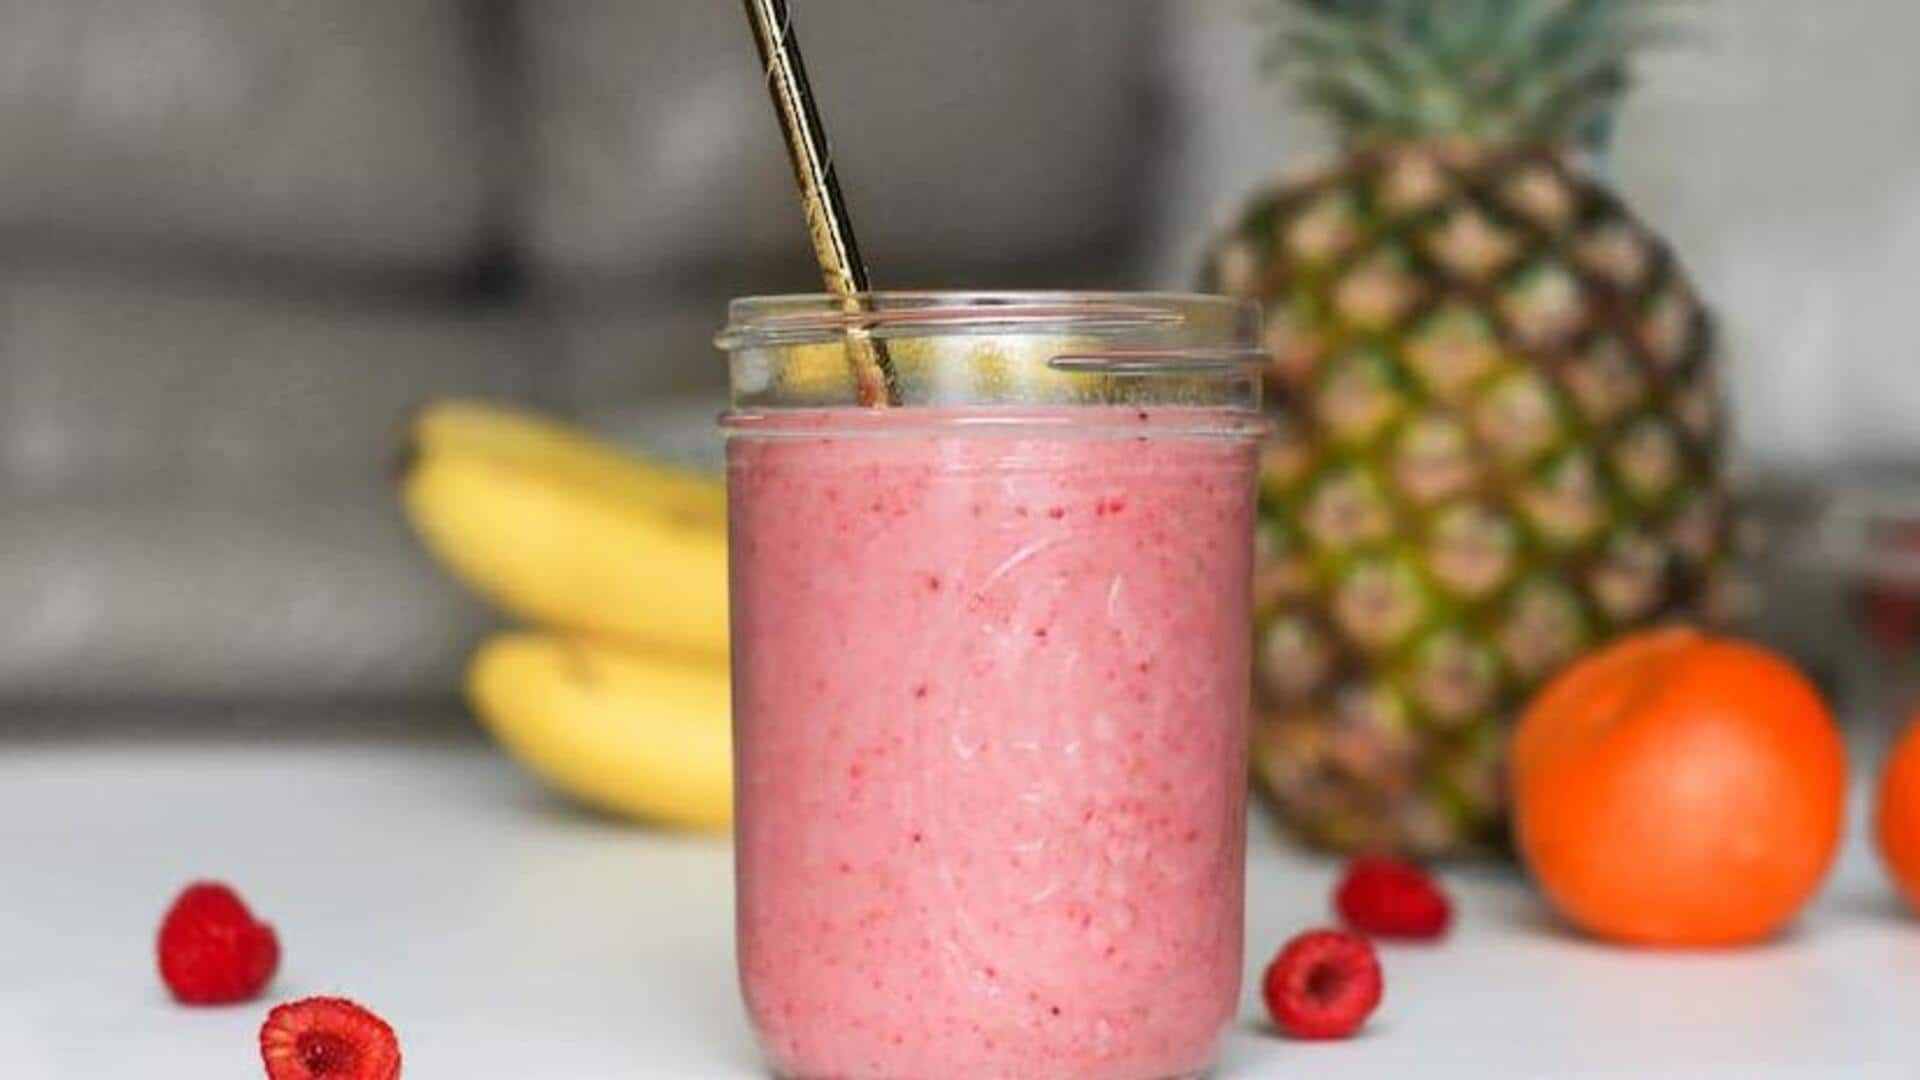 Boost your mood with these lip-smacking vegan smoothies